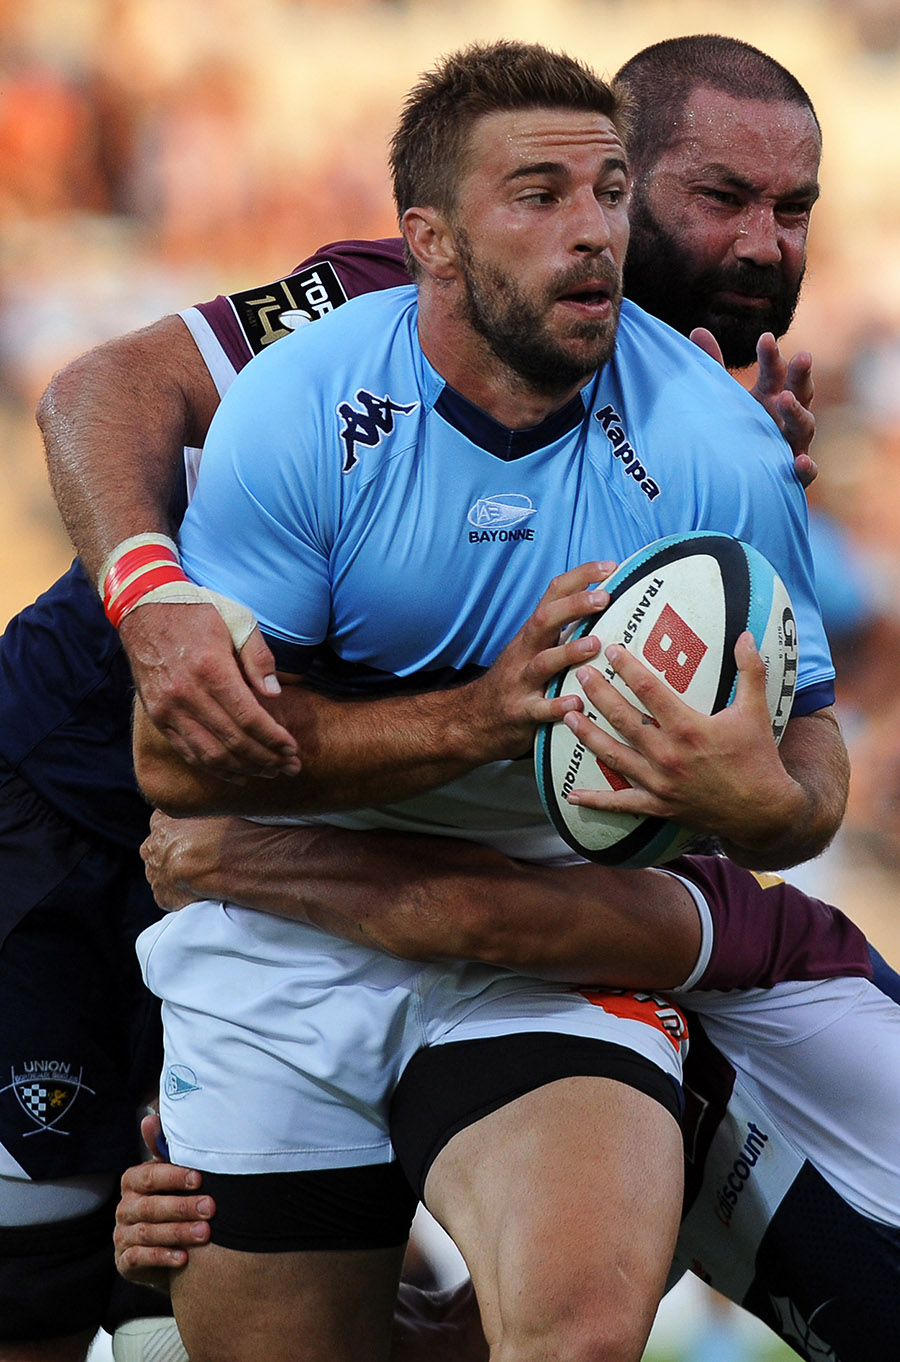 Bayonne's fullback Benjamin Thierry (L) is tackled by Bordeaux's number 8 Matthew Clarkin during a friednly